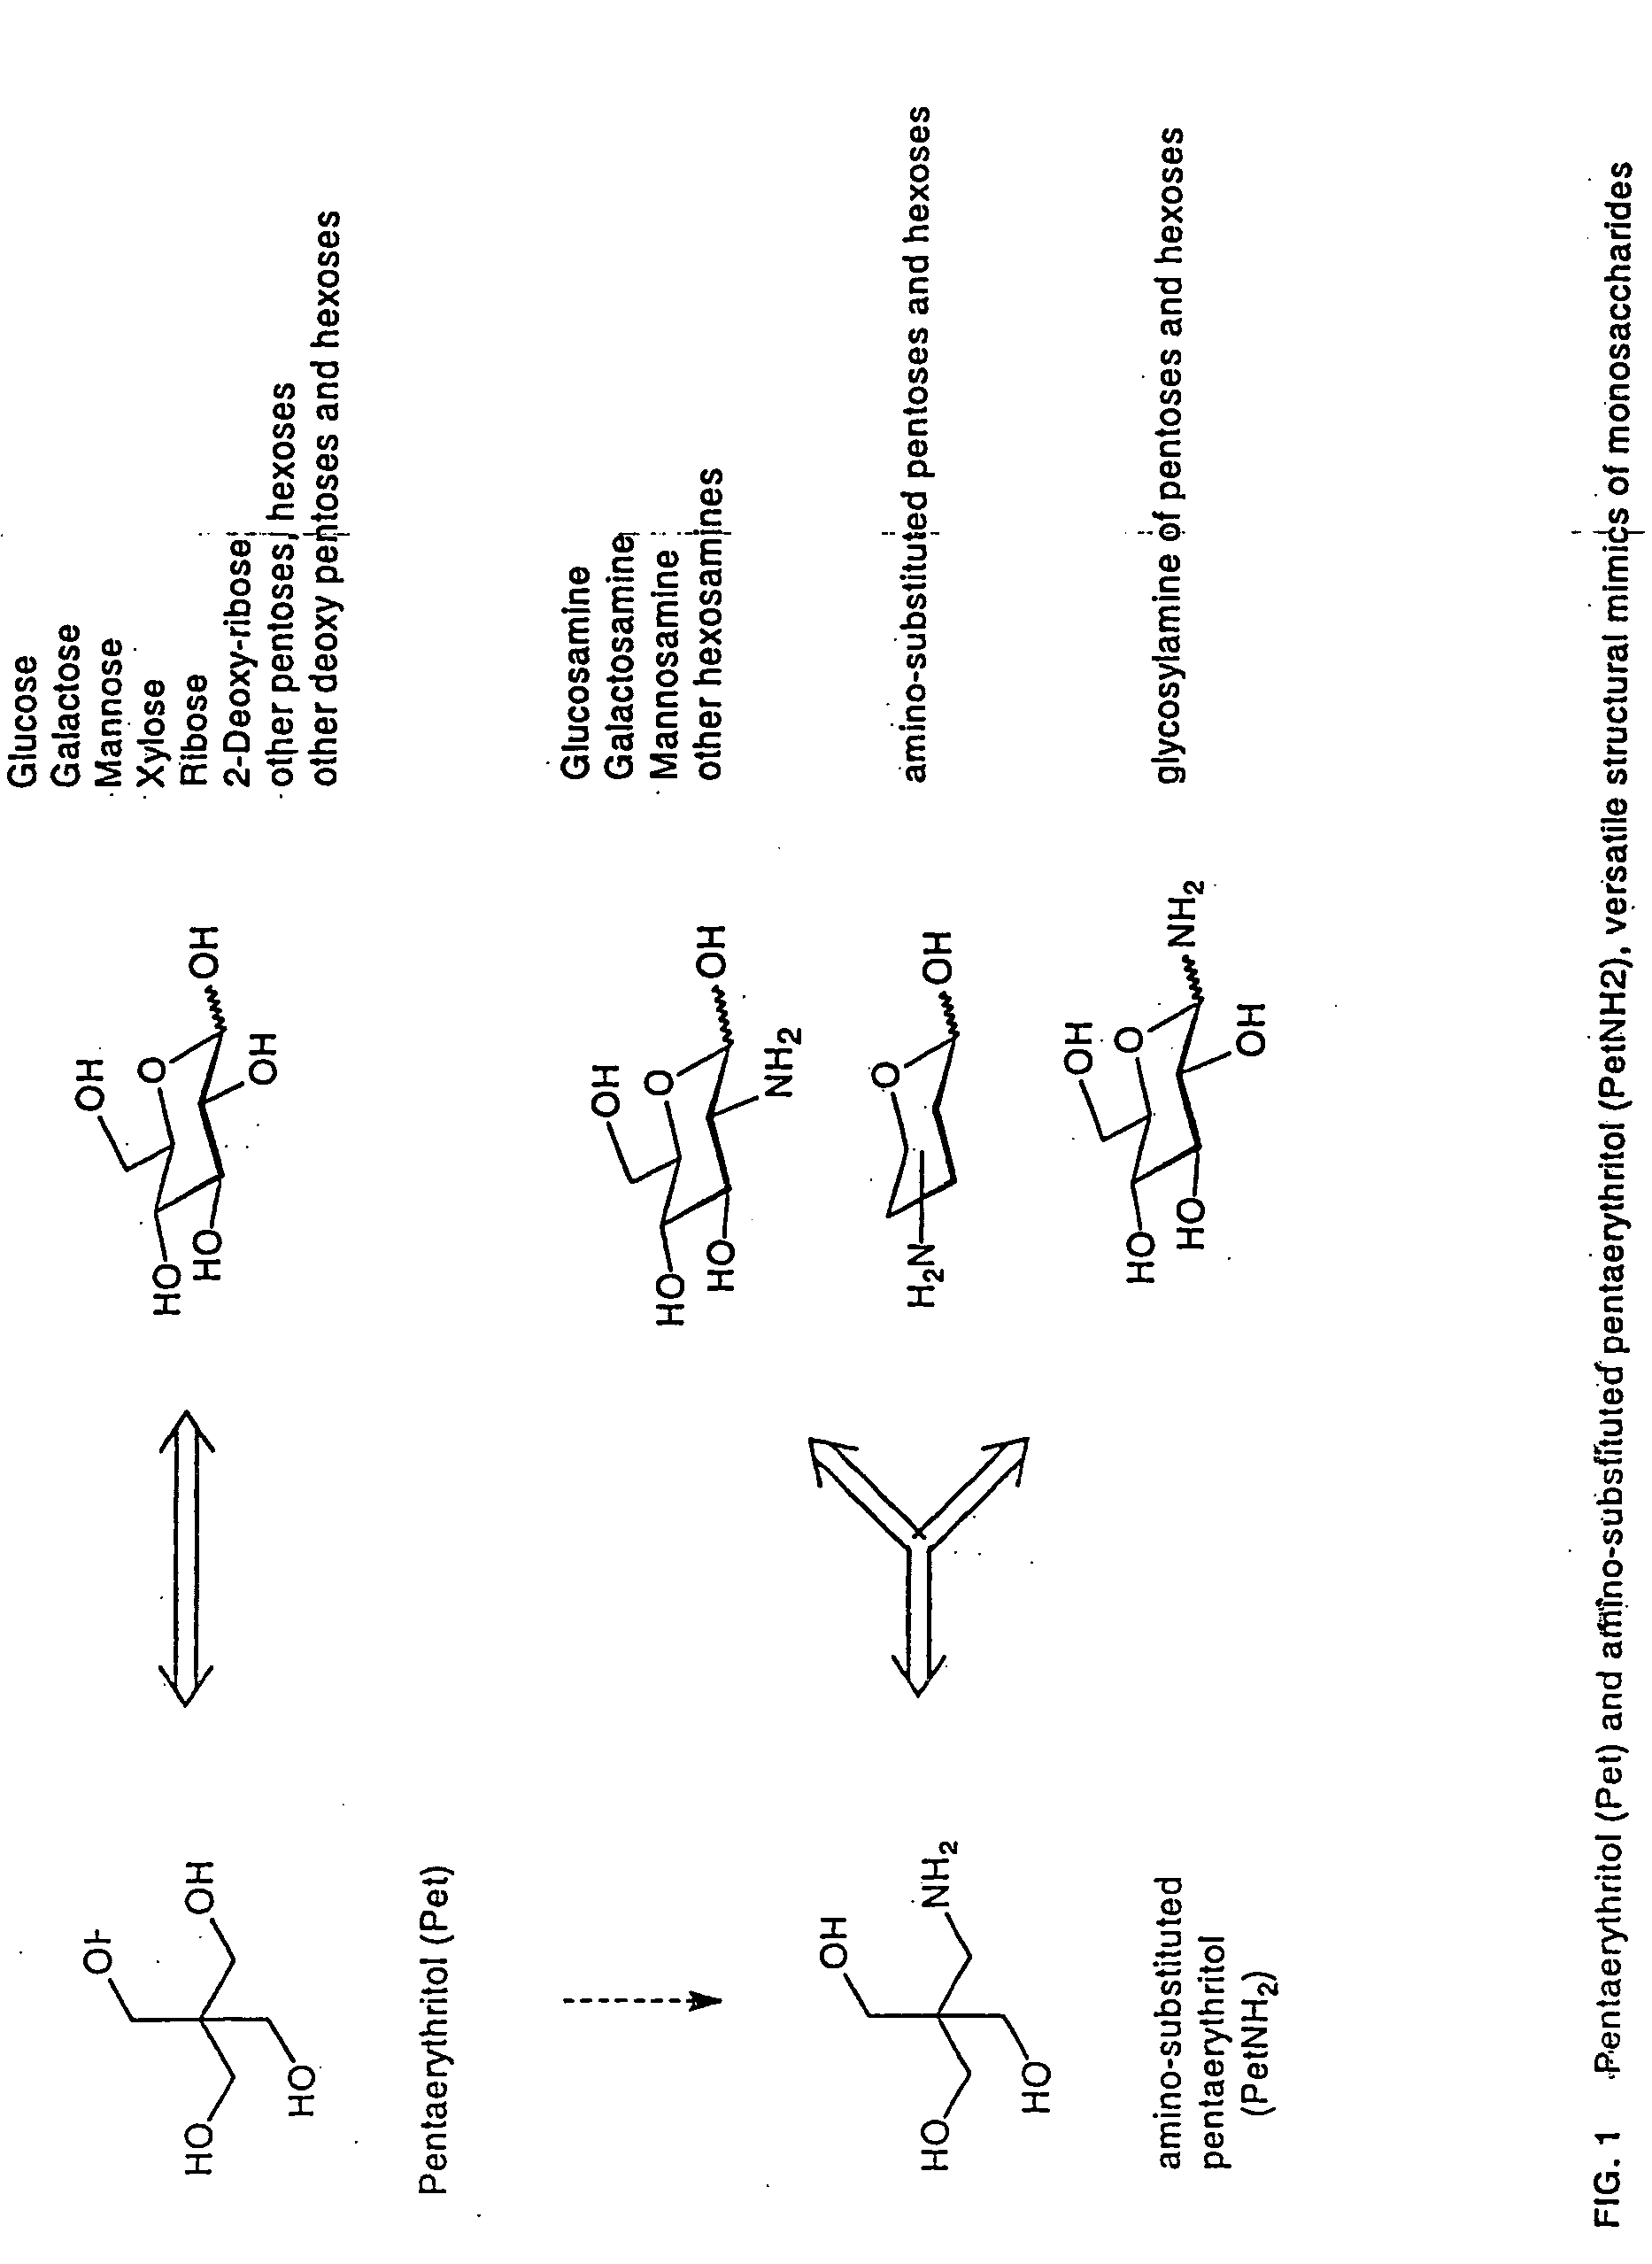 Lipid a and other carbohydrate ligand analogs